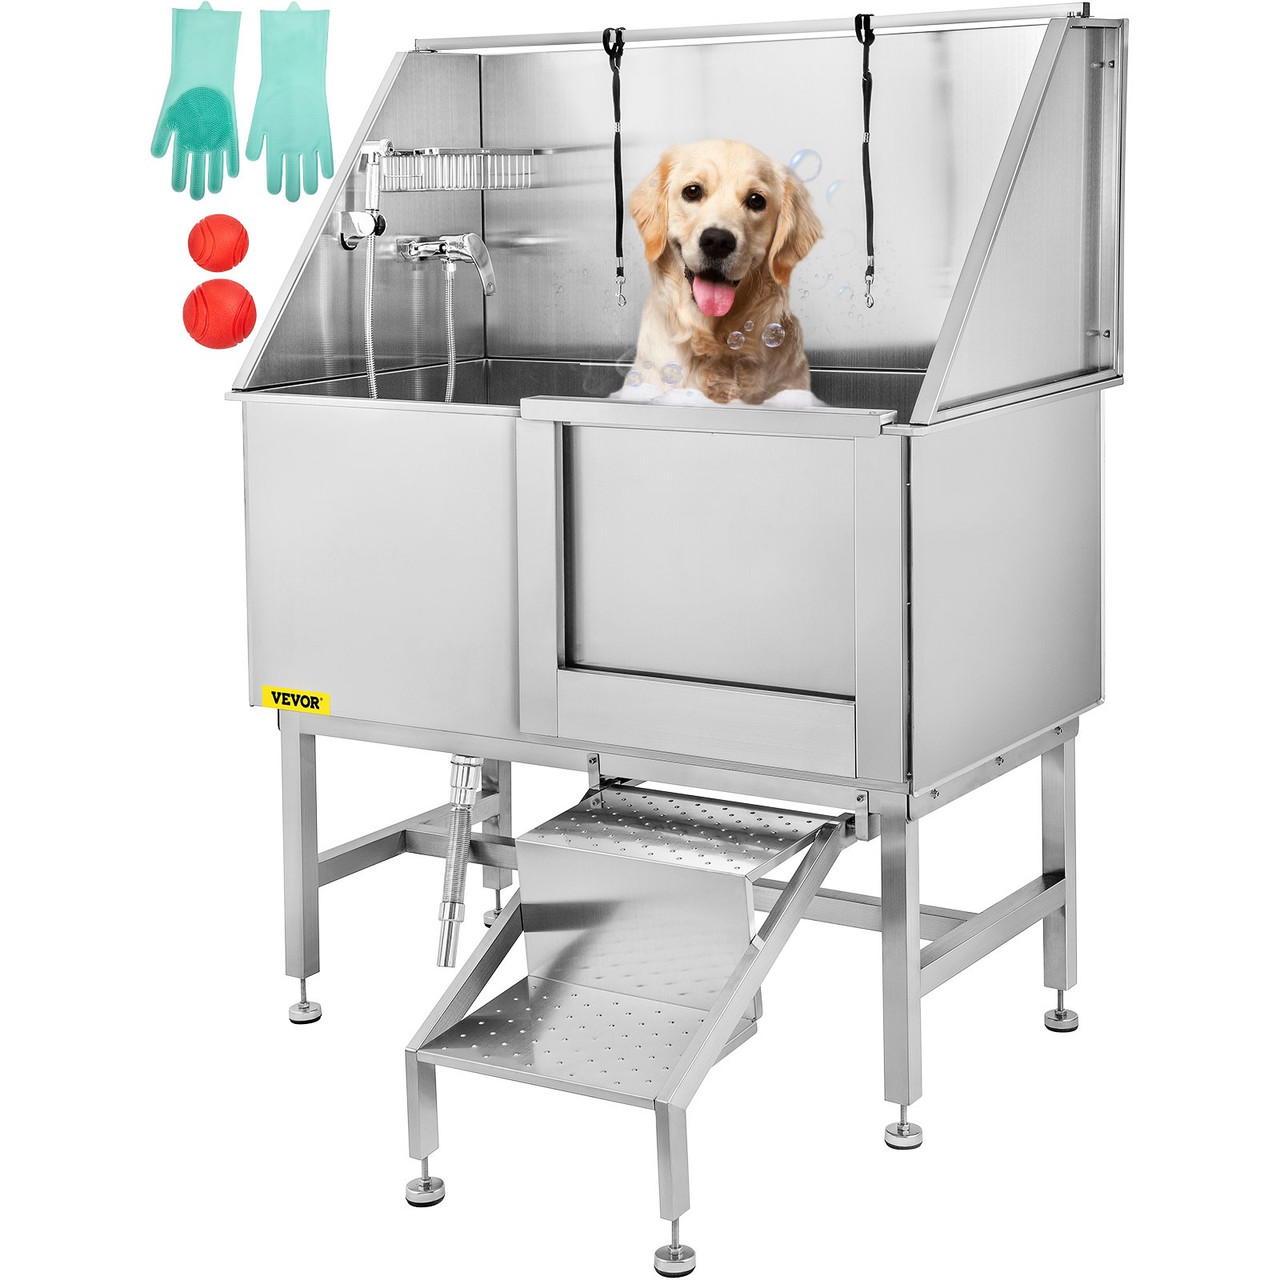 50 Large Hydraulic Dog Grooming Table Deluxe Electric Pet